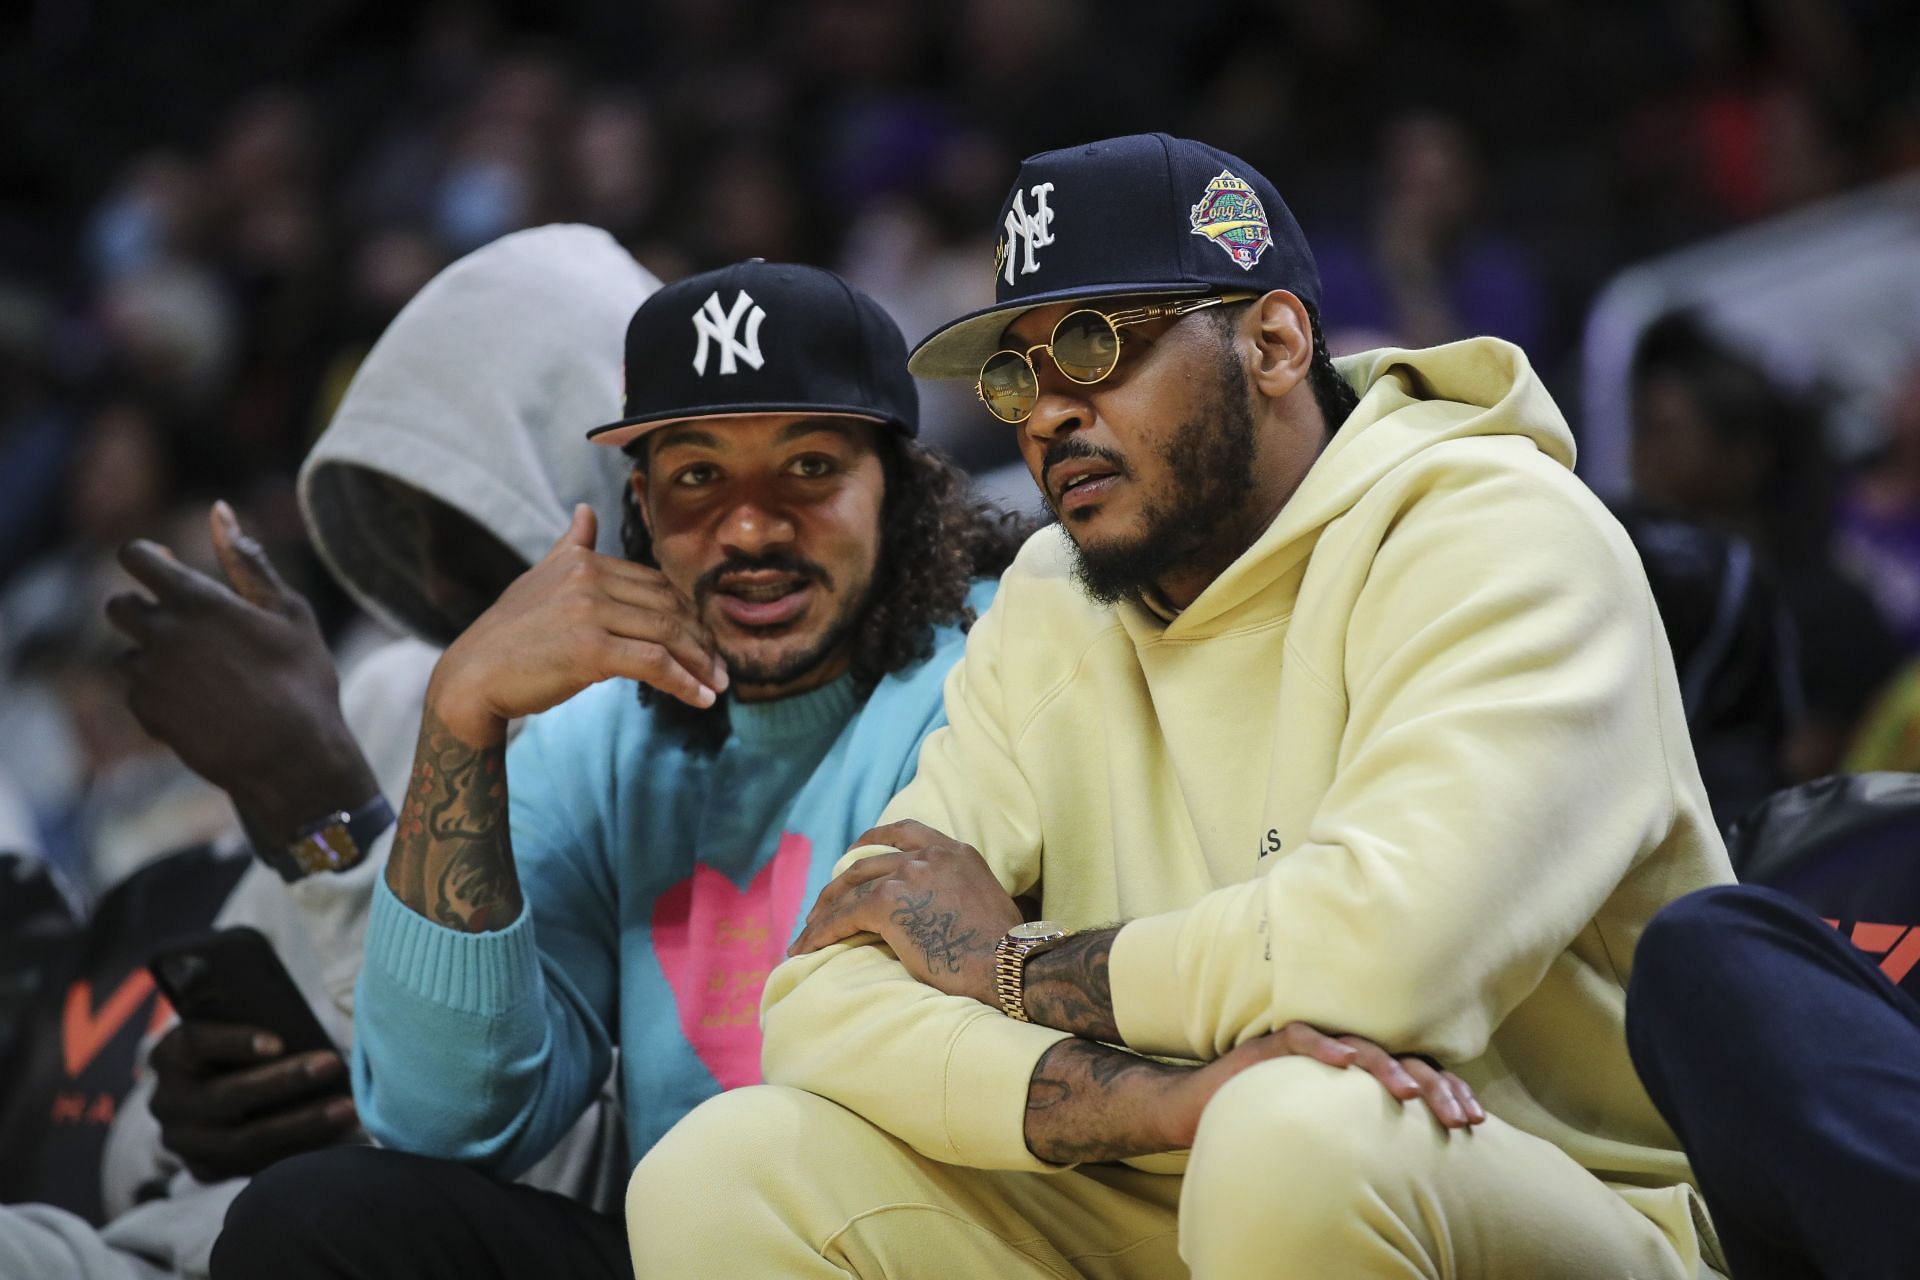 All About Carmelo Anthony's Son Kiyan